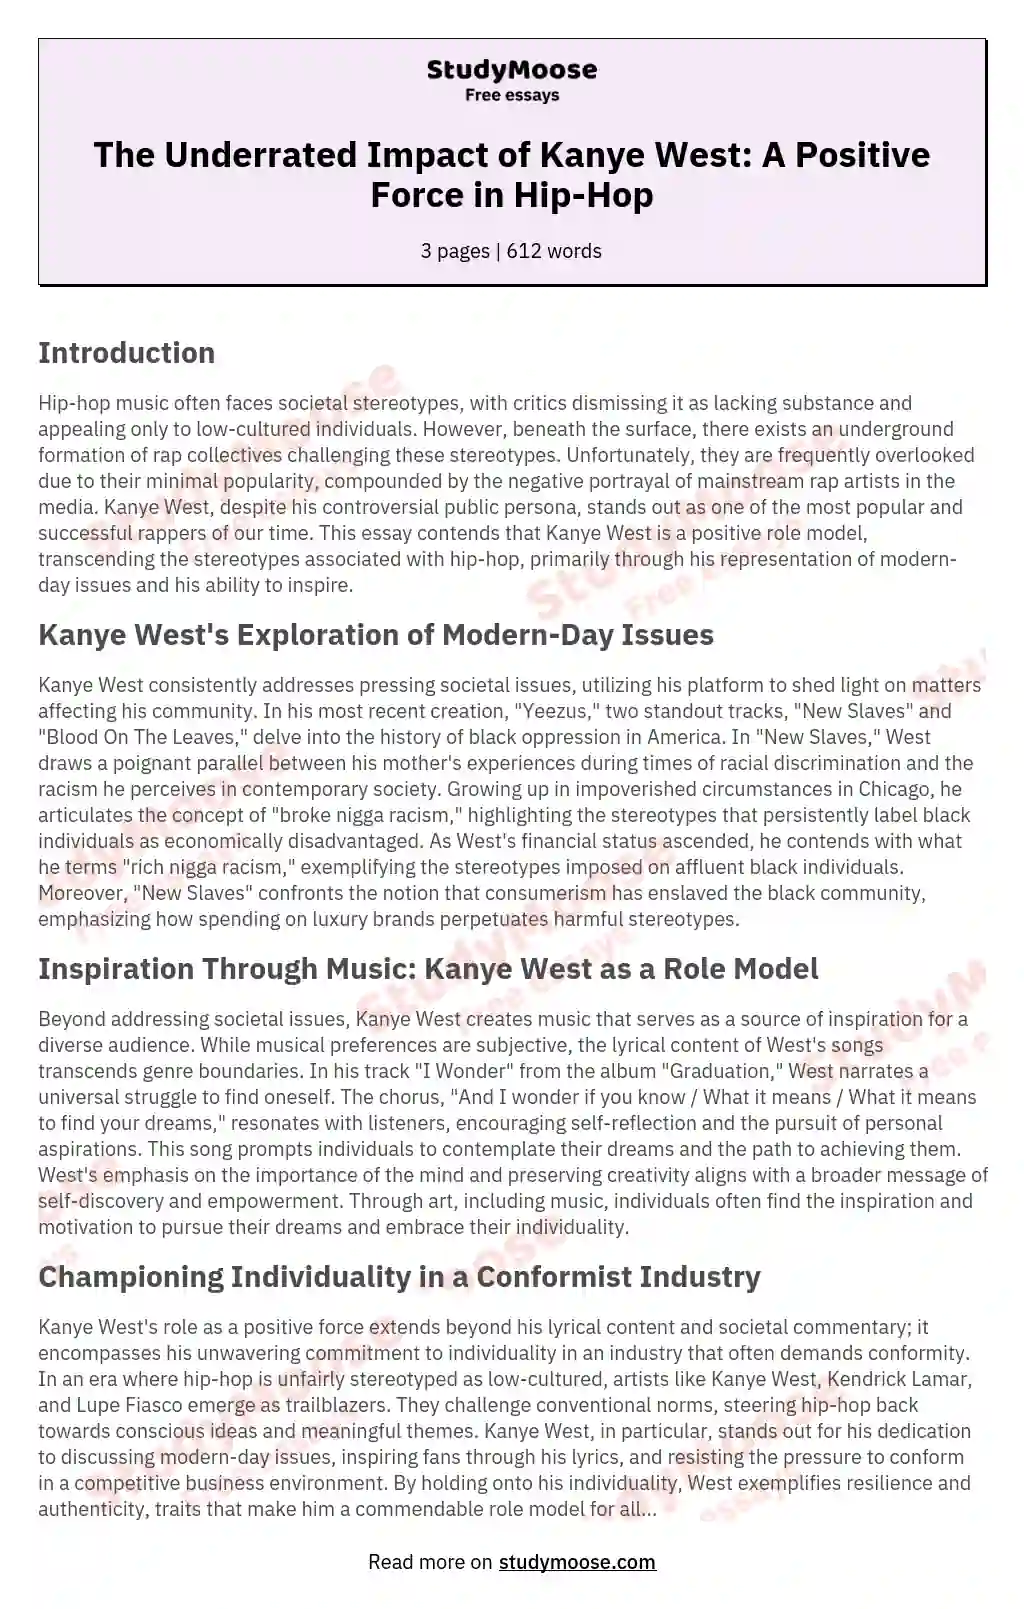 The Underrated Impact of Kanye West: A Positive Force in Hip-Hop essay